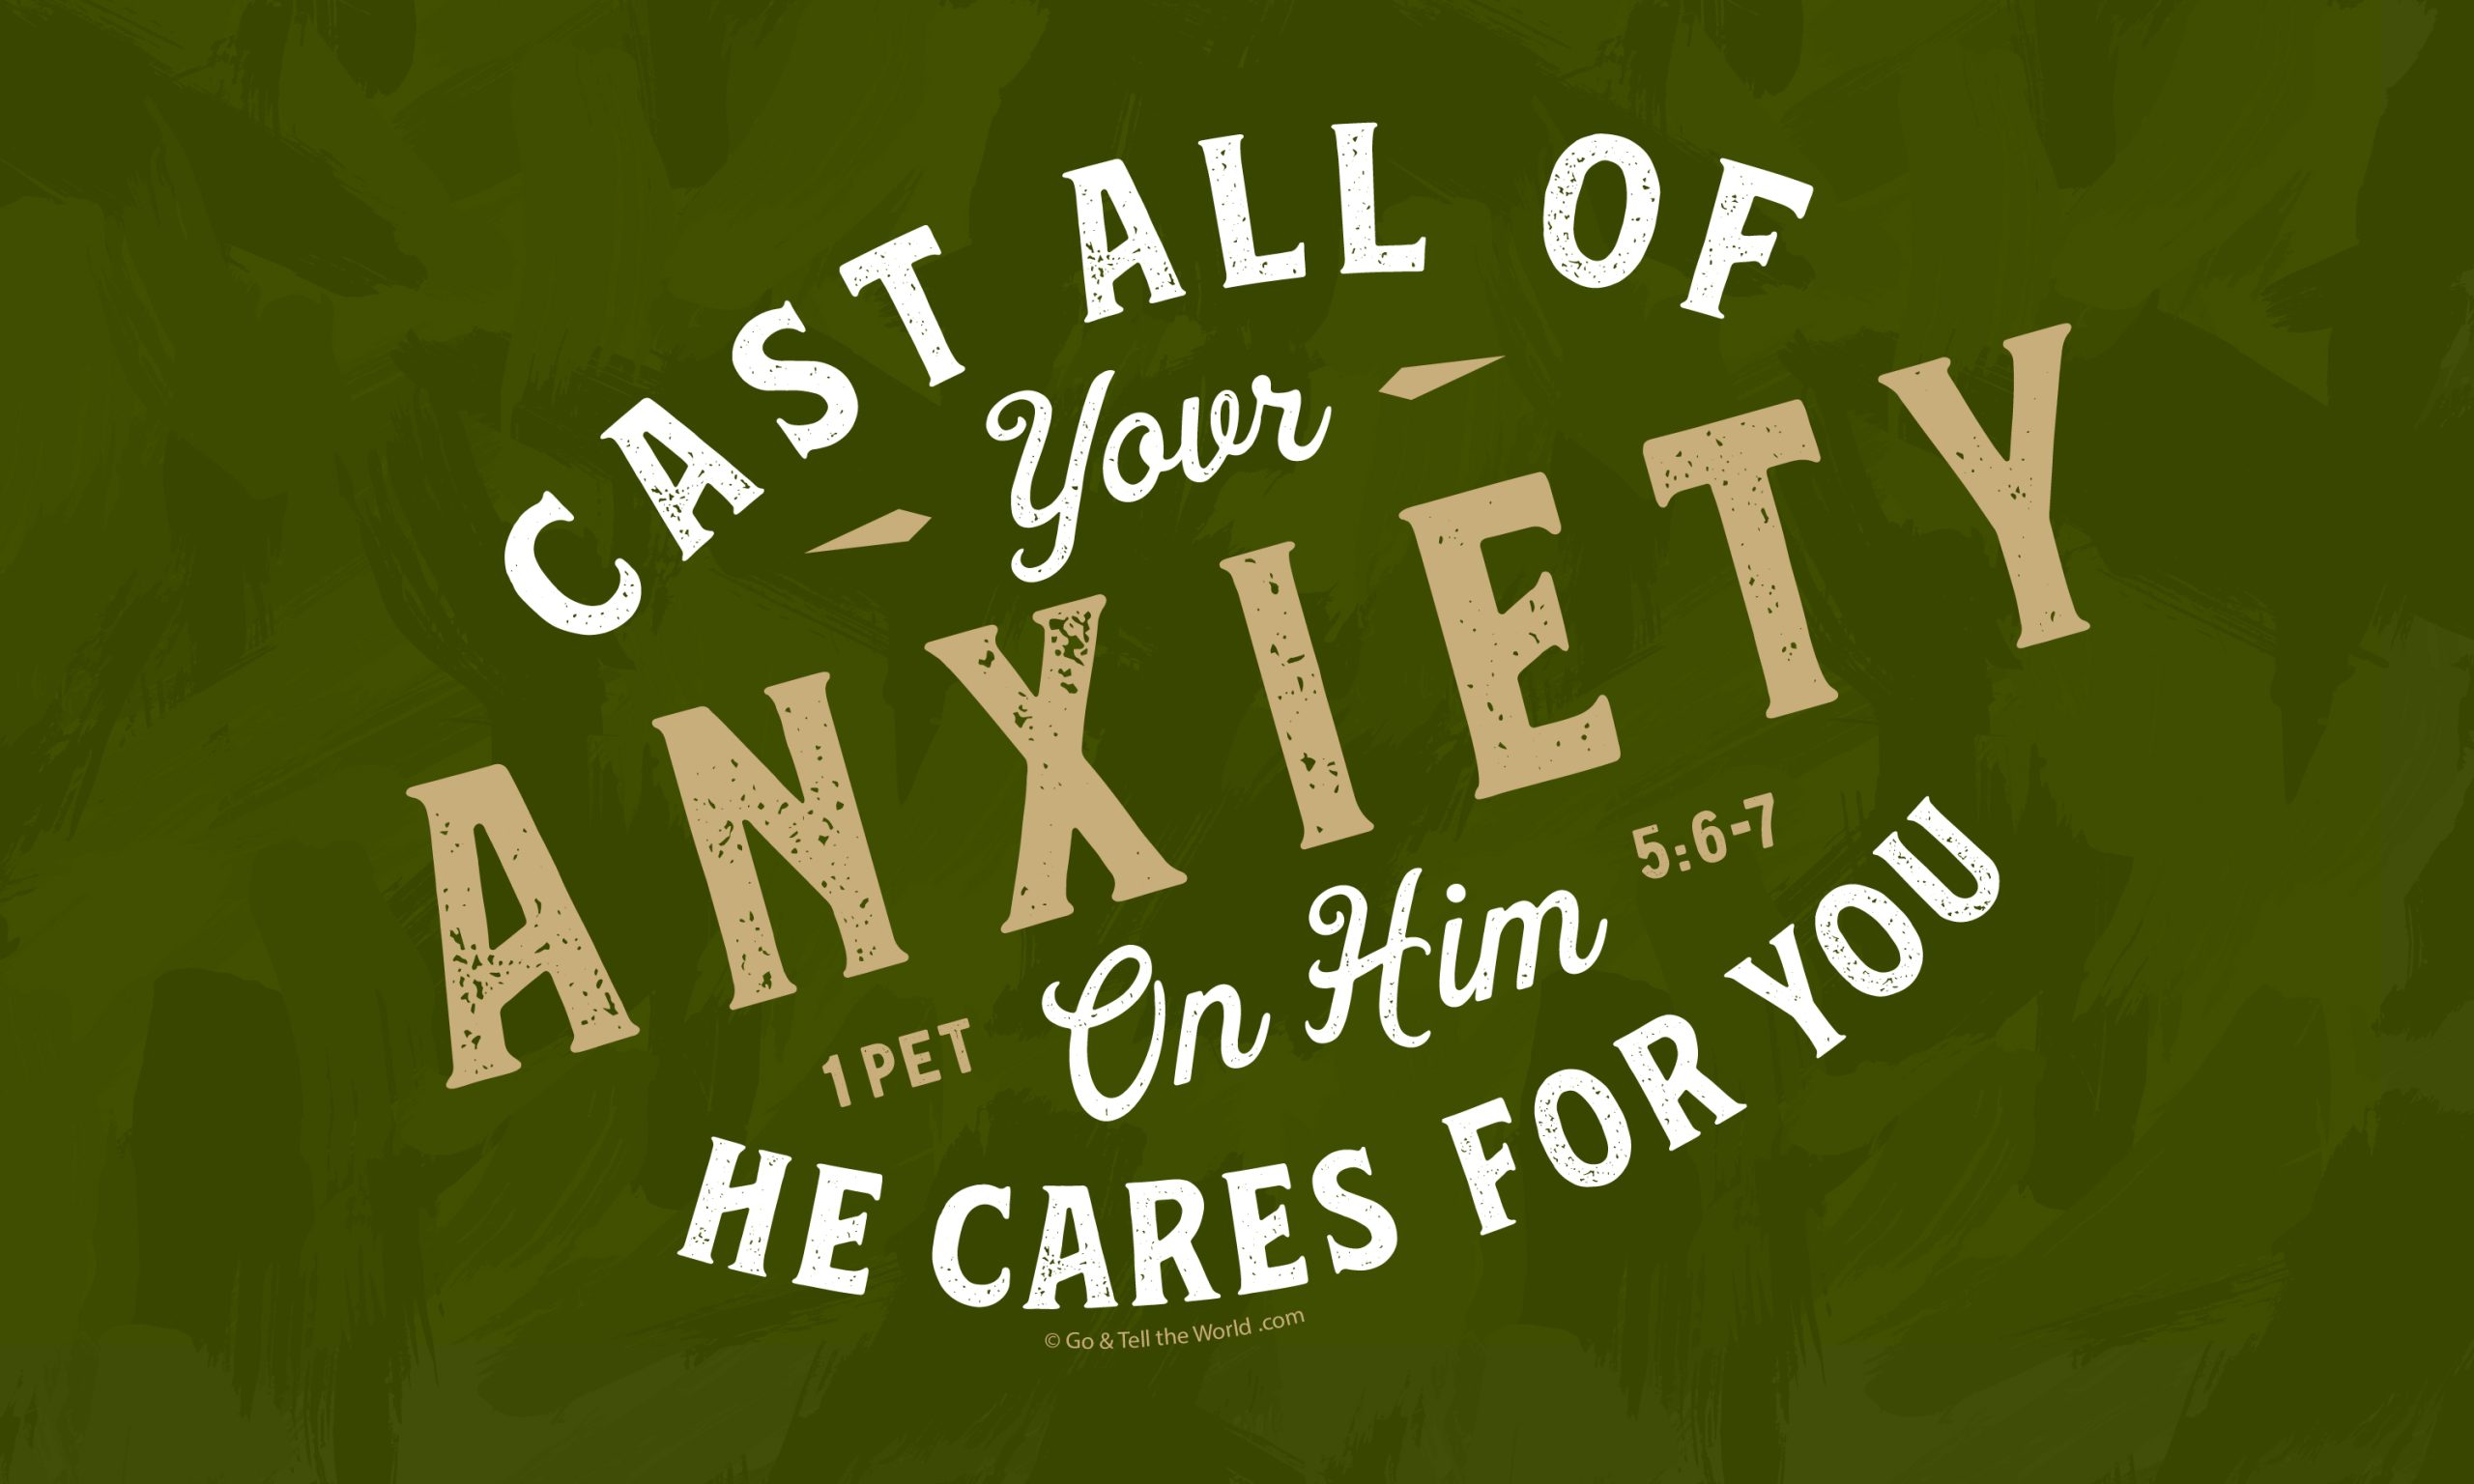 Cast All of Your Anxiety on Him, for He cares for you